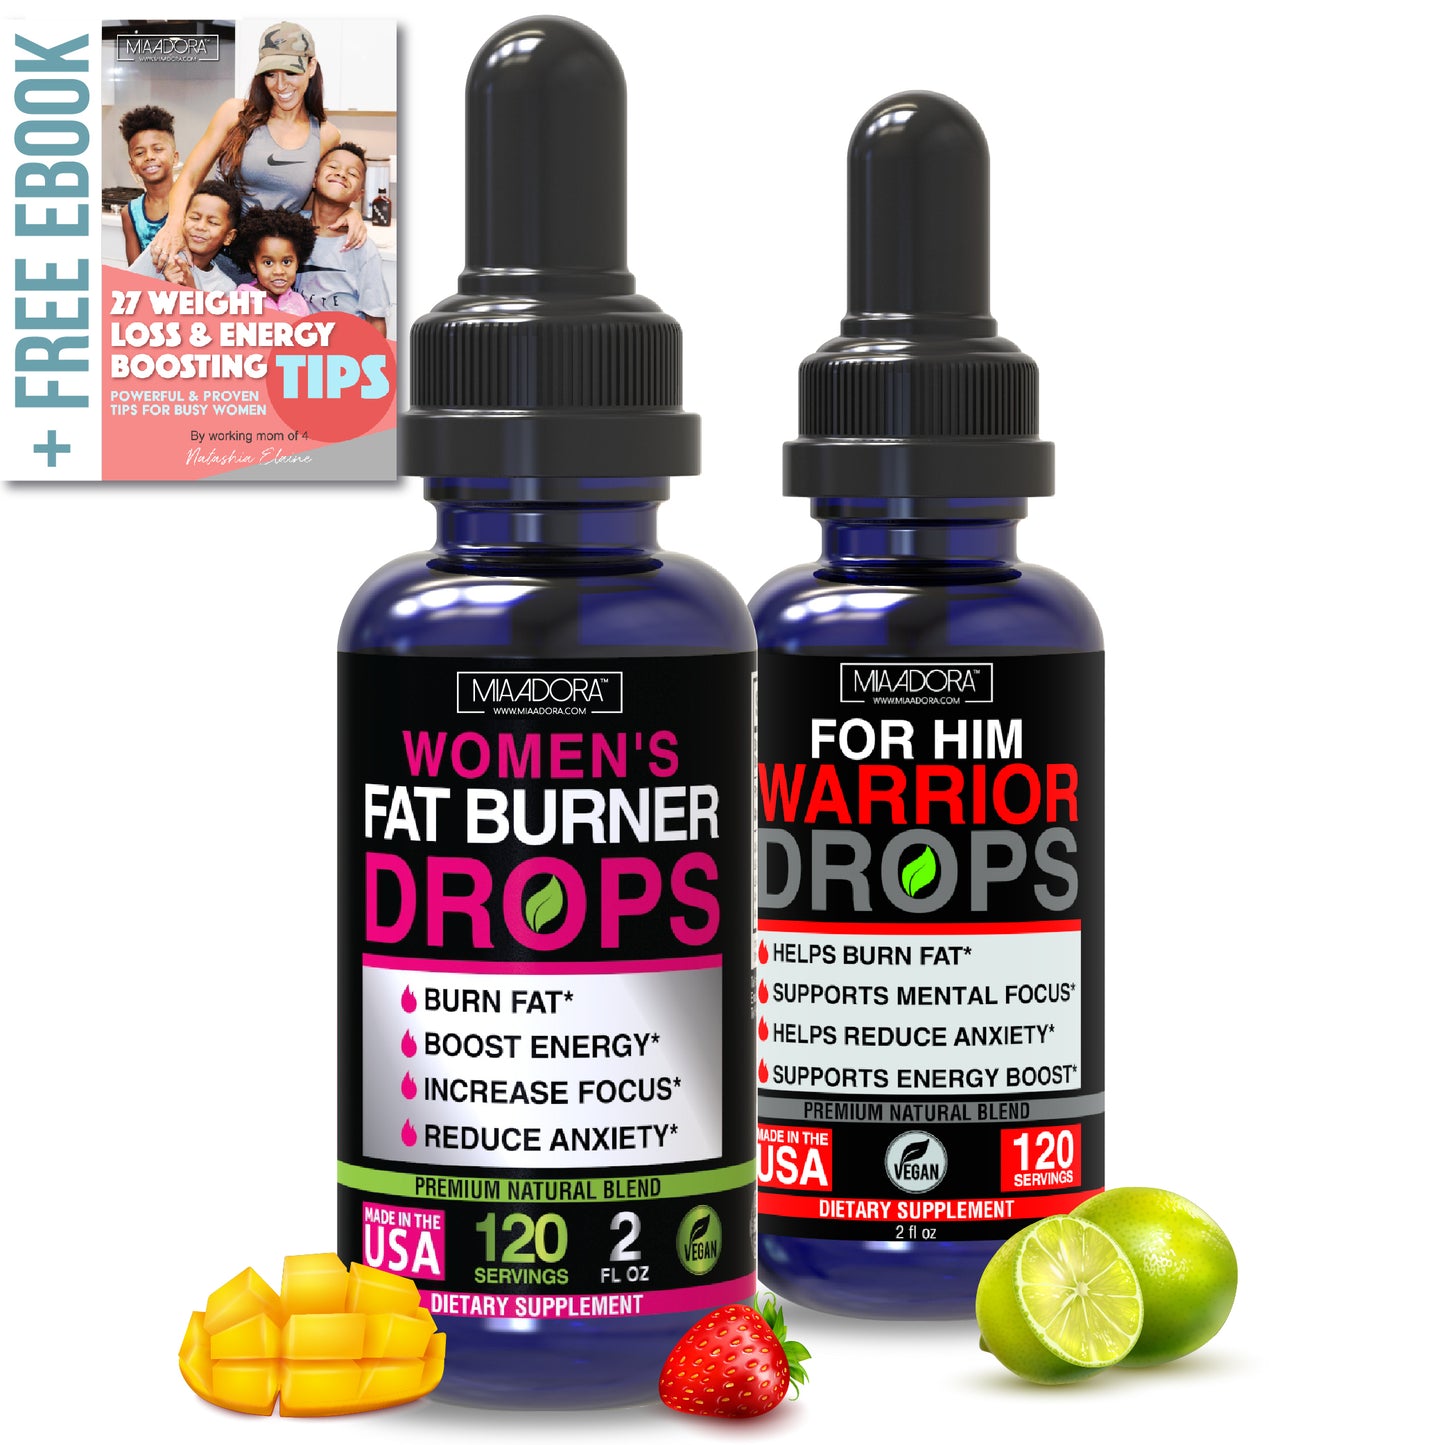 For Her & for Him - Premium Fat Burner Drops with Adaptogens